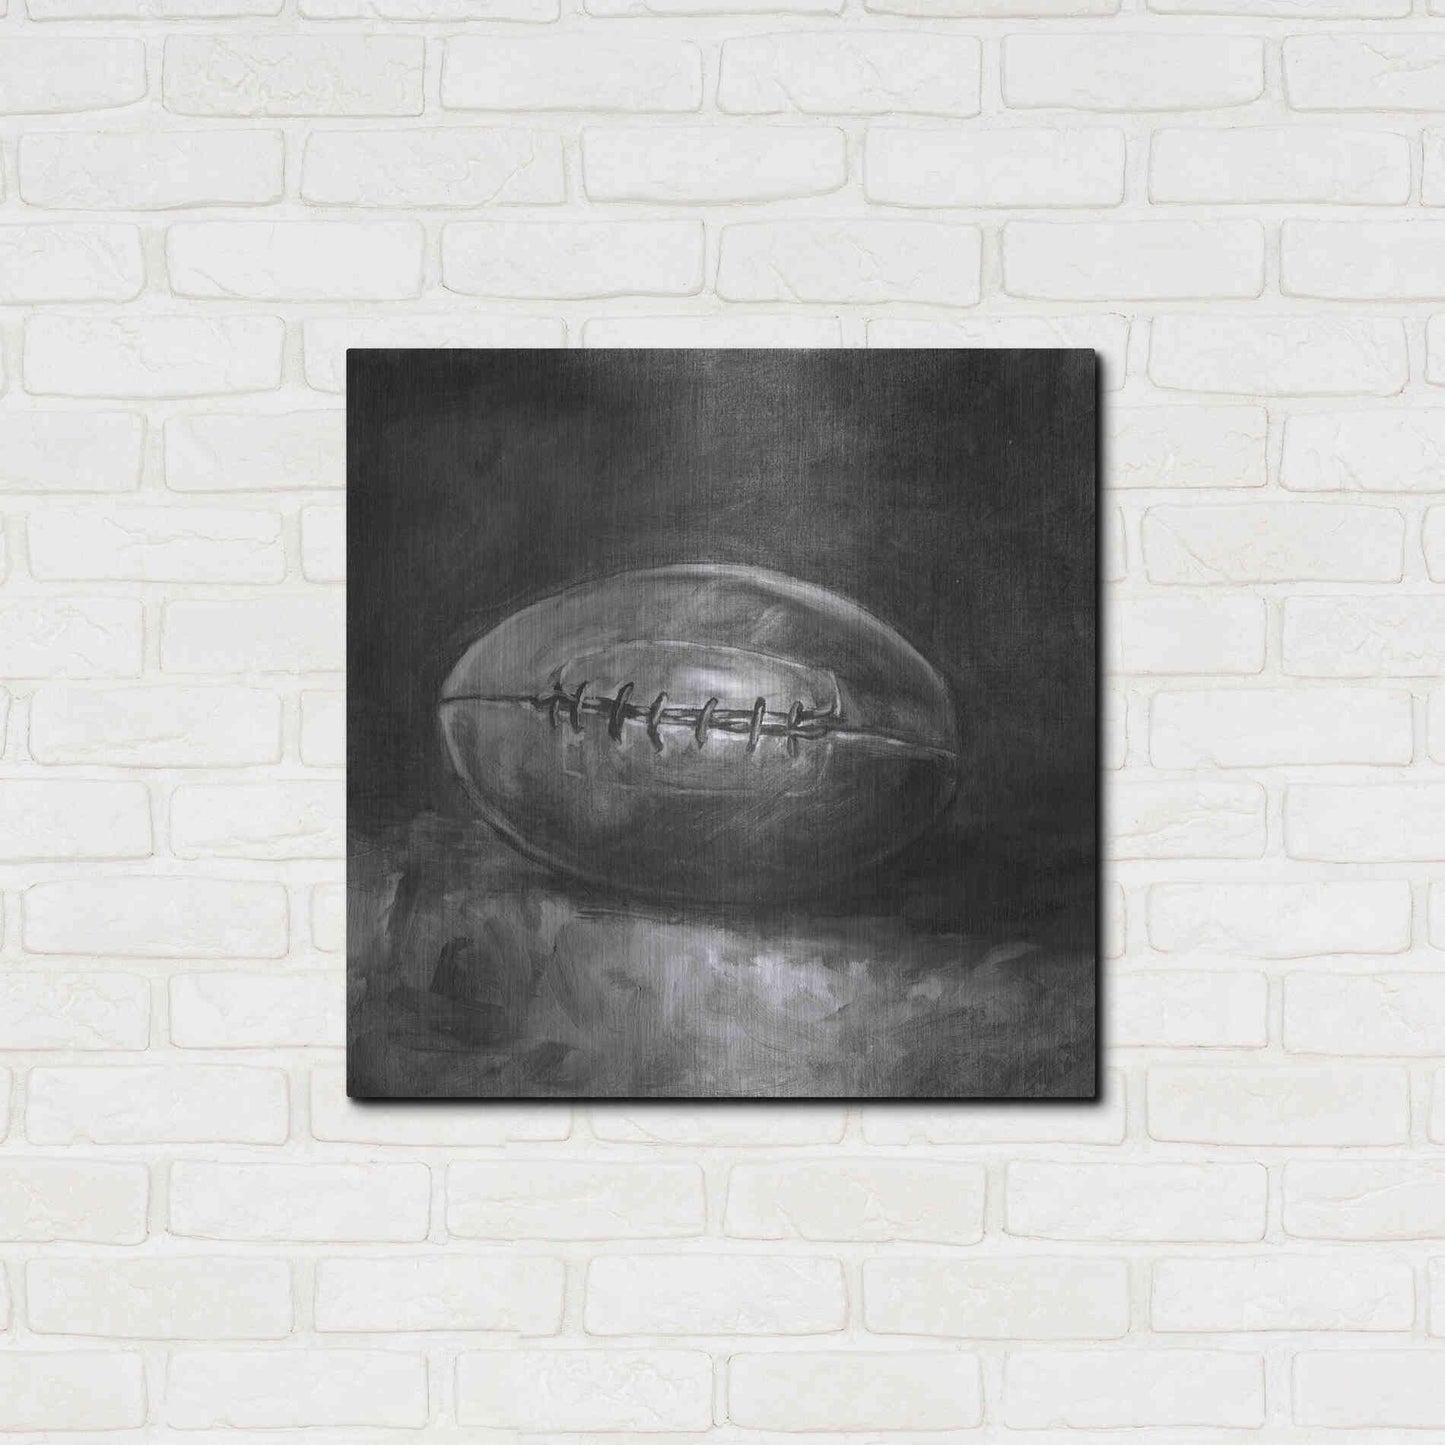 Luxe Metal Art 'Rustic Sports IV Black and White' by Ethan Harper, Metal Wall Art,24x24